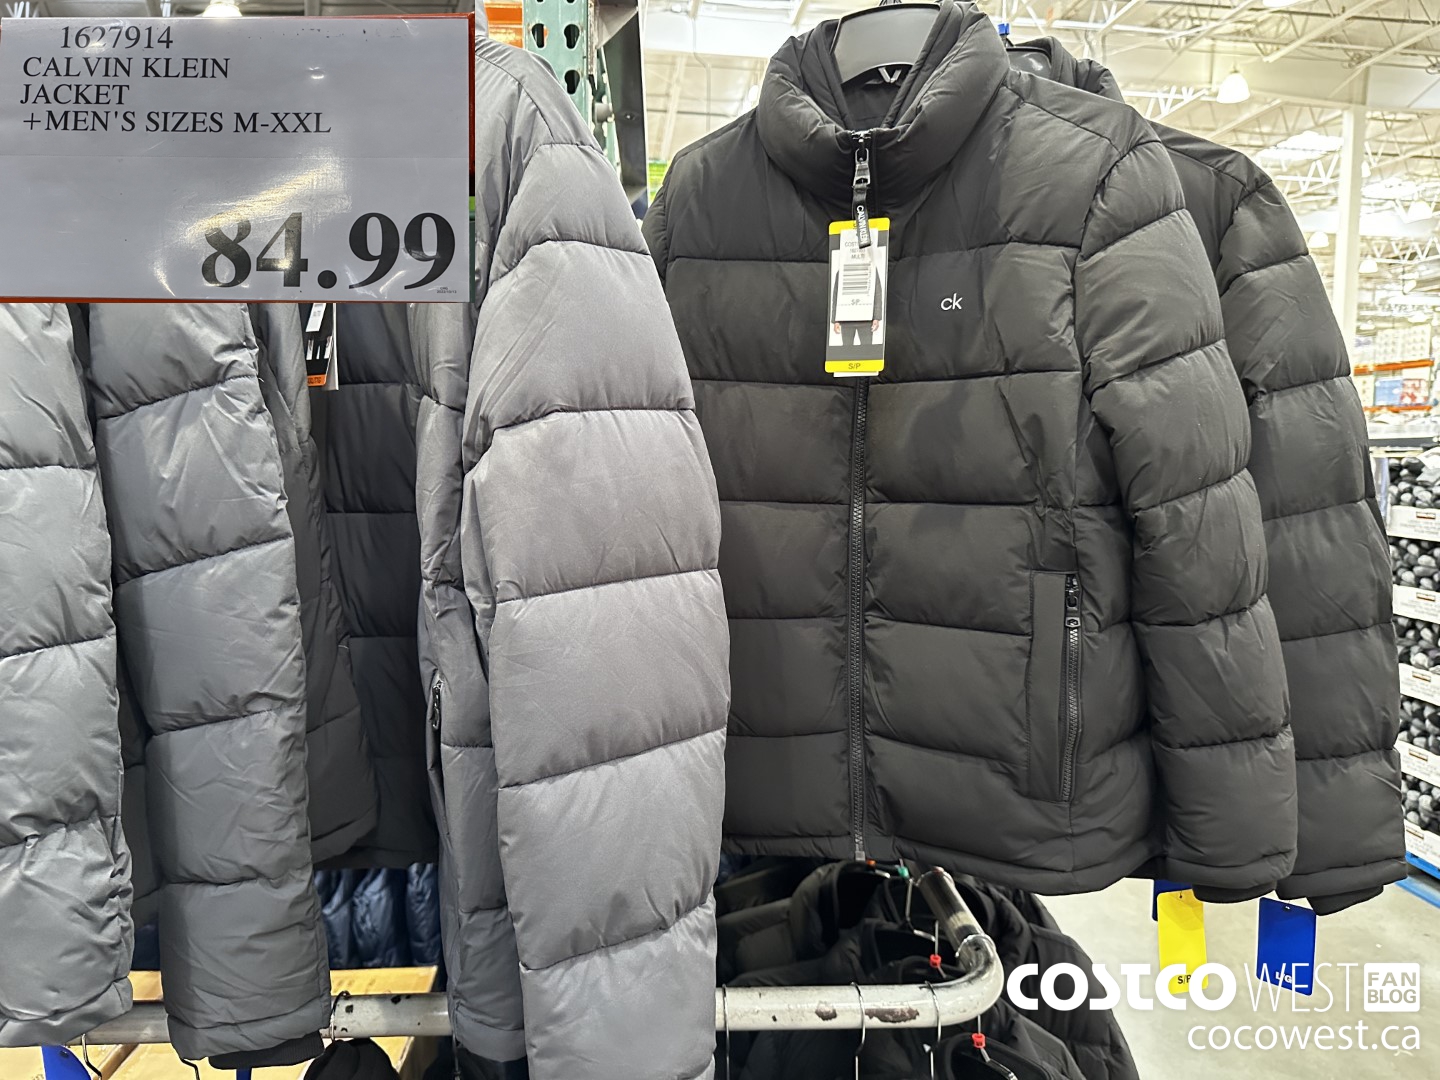 Costco Fall 2022 Superpost – The Entire Clothing Section - Jackets